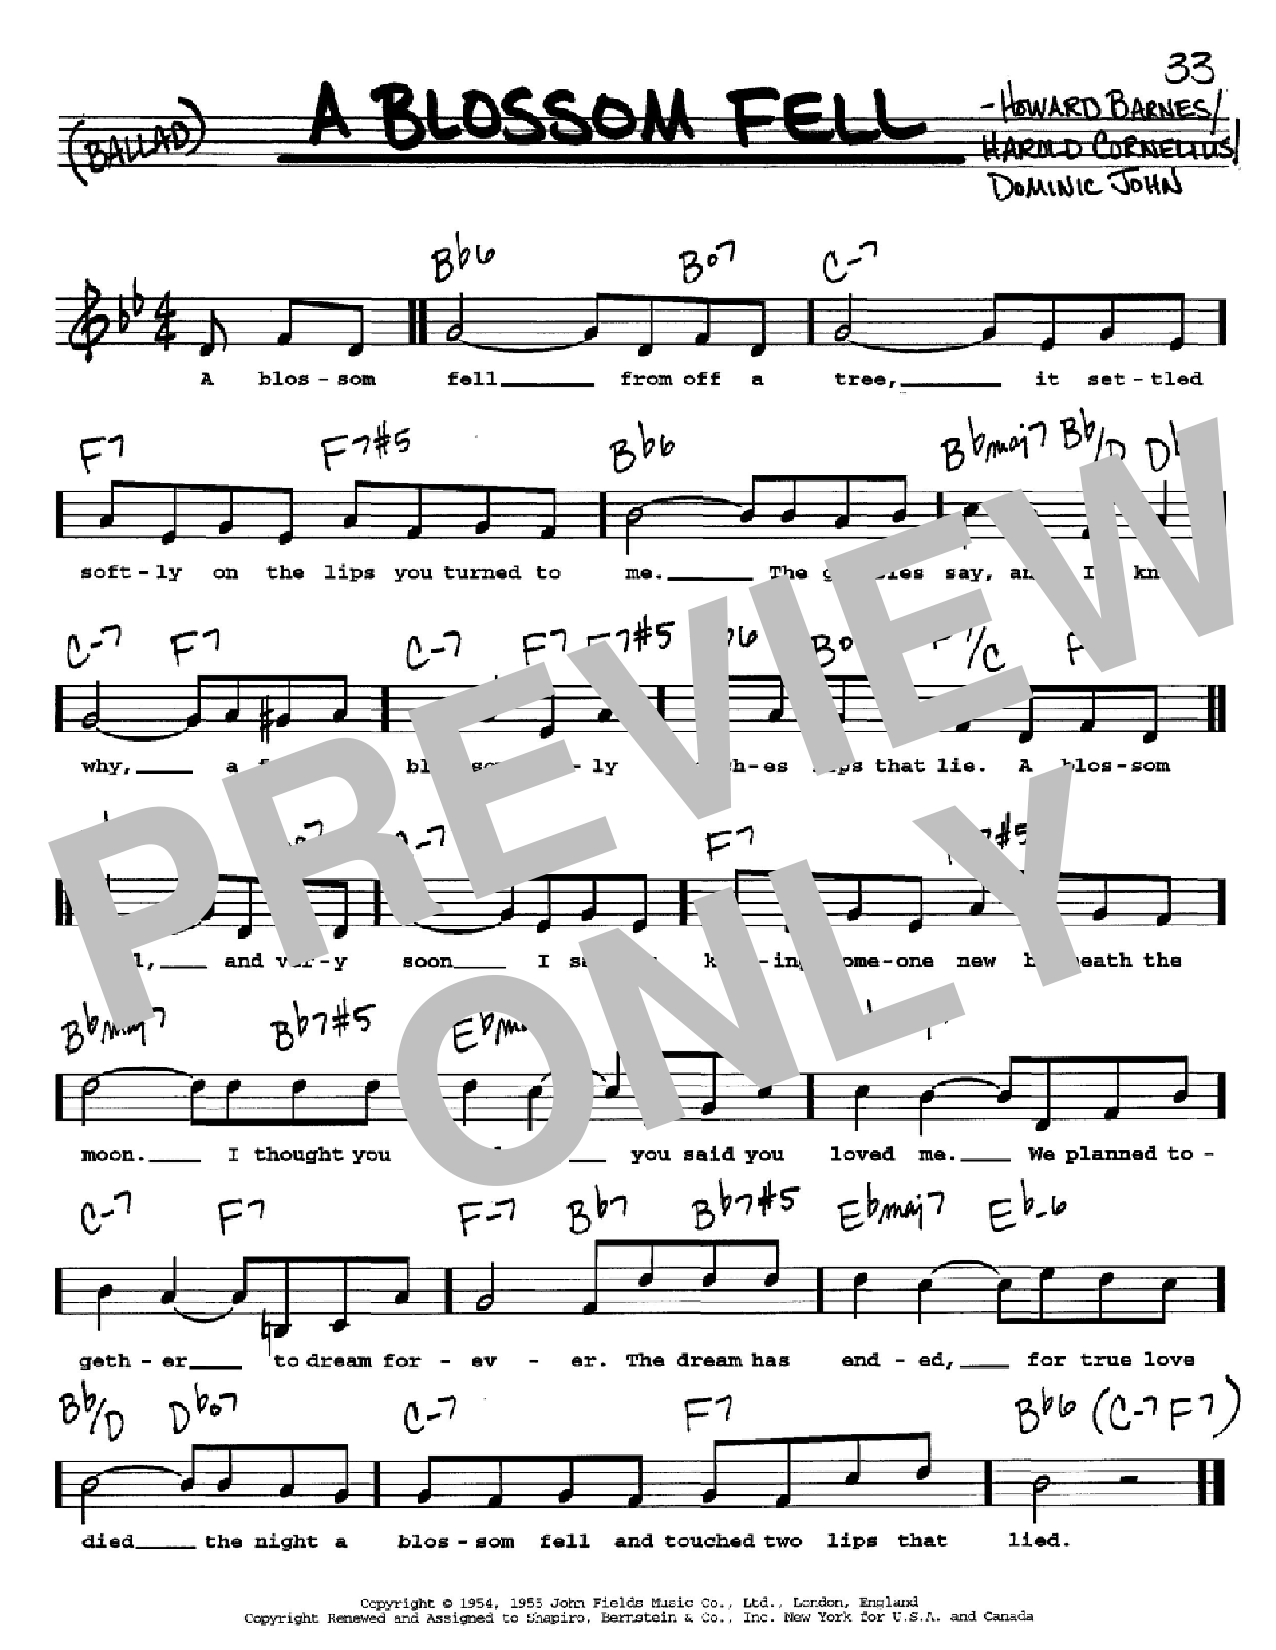 Download Nat King Cole A Blossom Fell Sheet Music